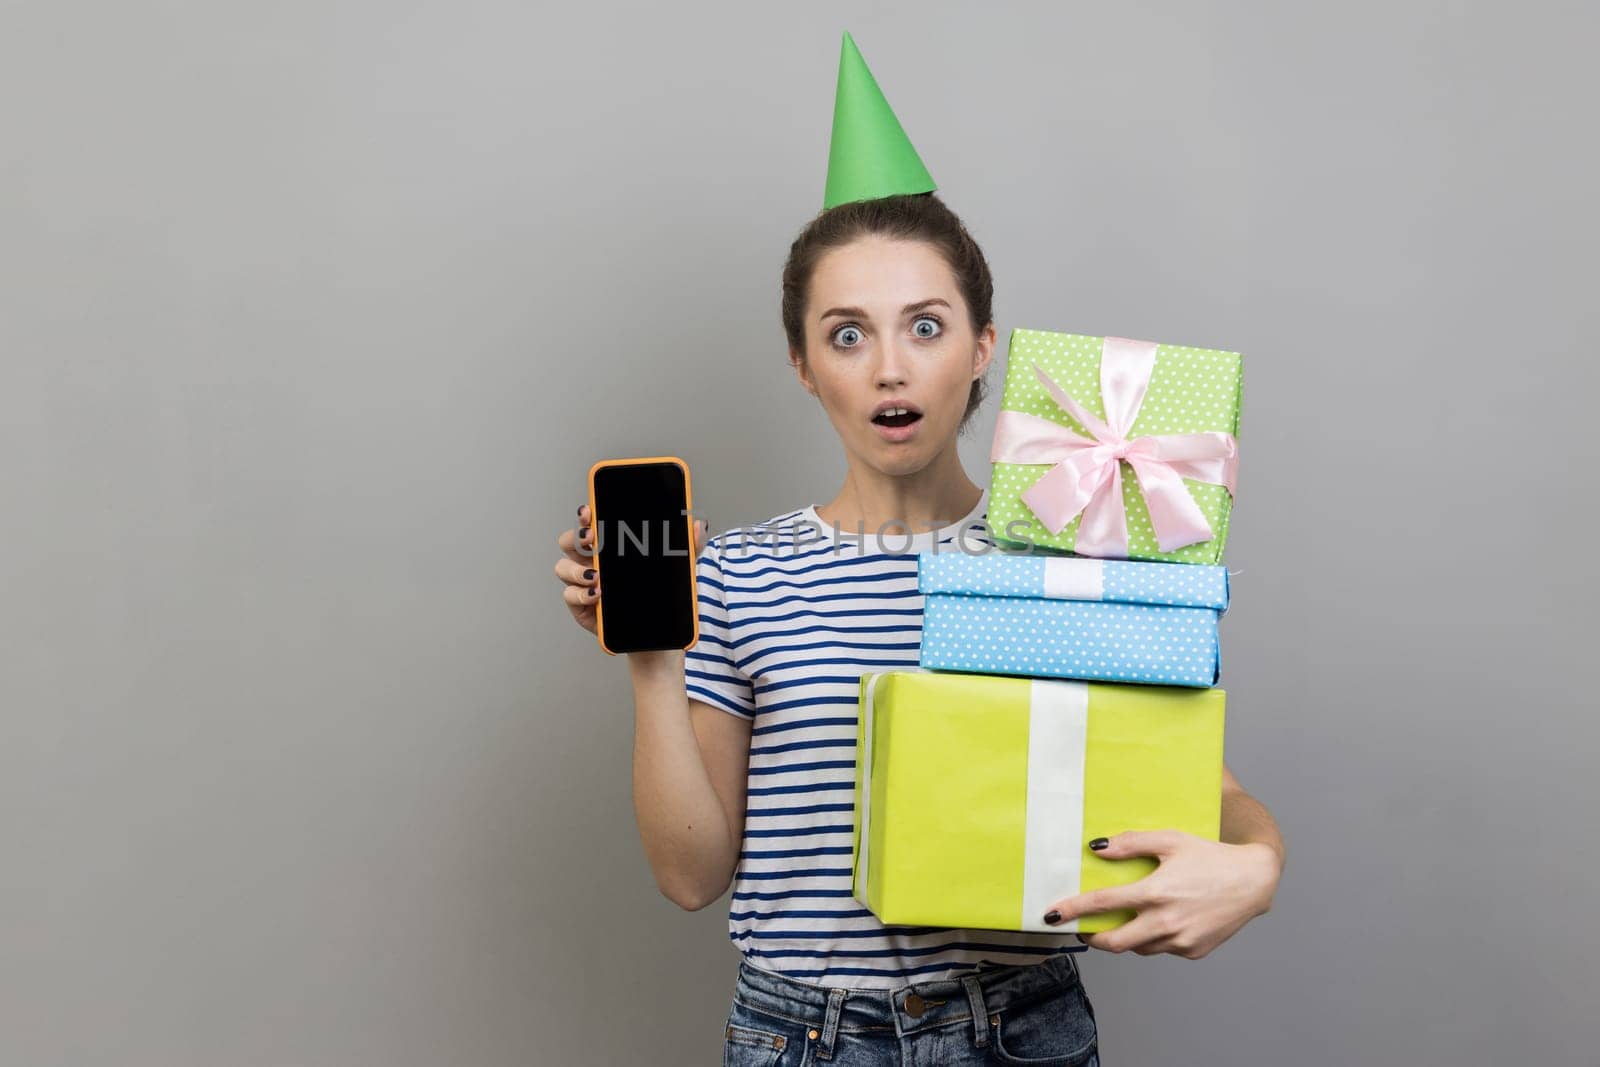 Portrait of shocked woman wearing striped T-shirt and party cone, holding stack of present boxes and showing mobile phone with blank display. Indoor studio shot isolated on gray background.